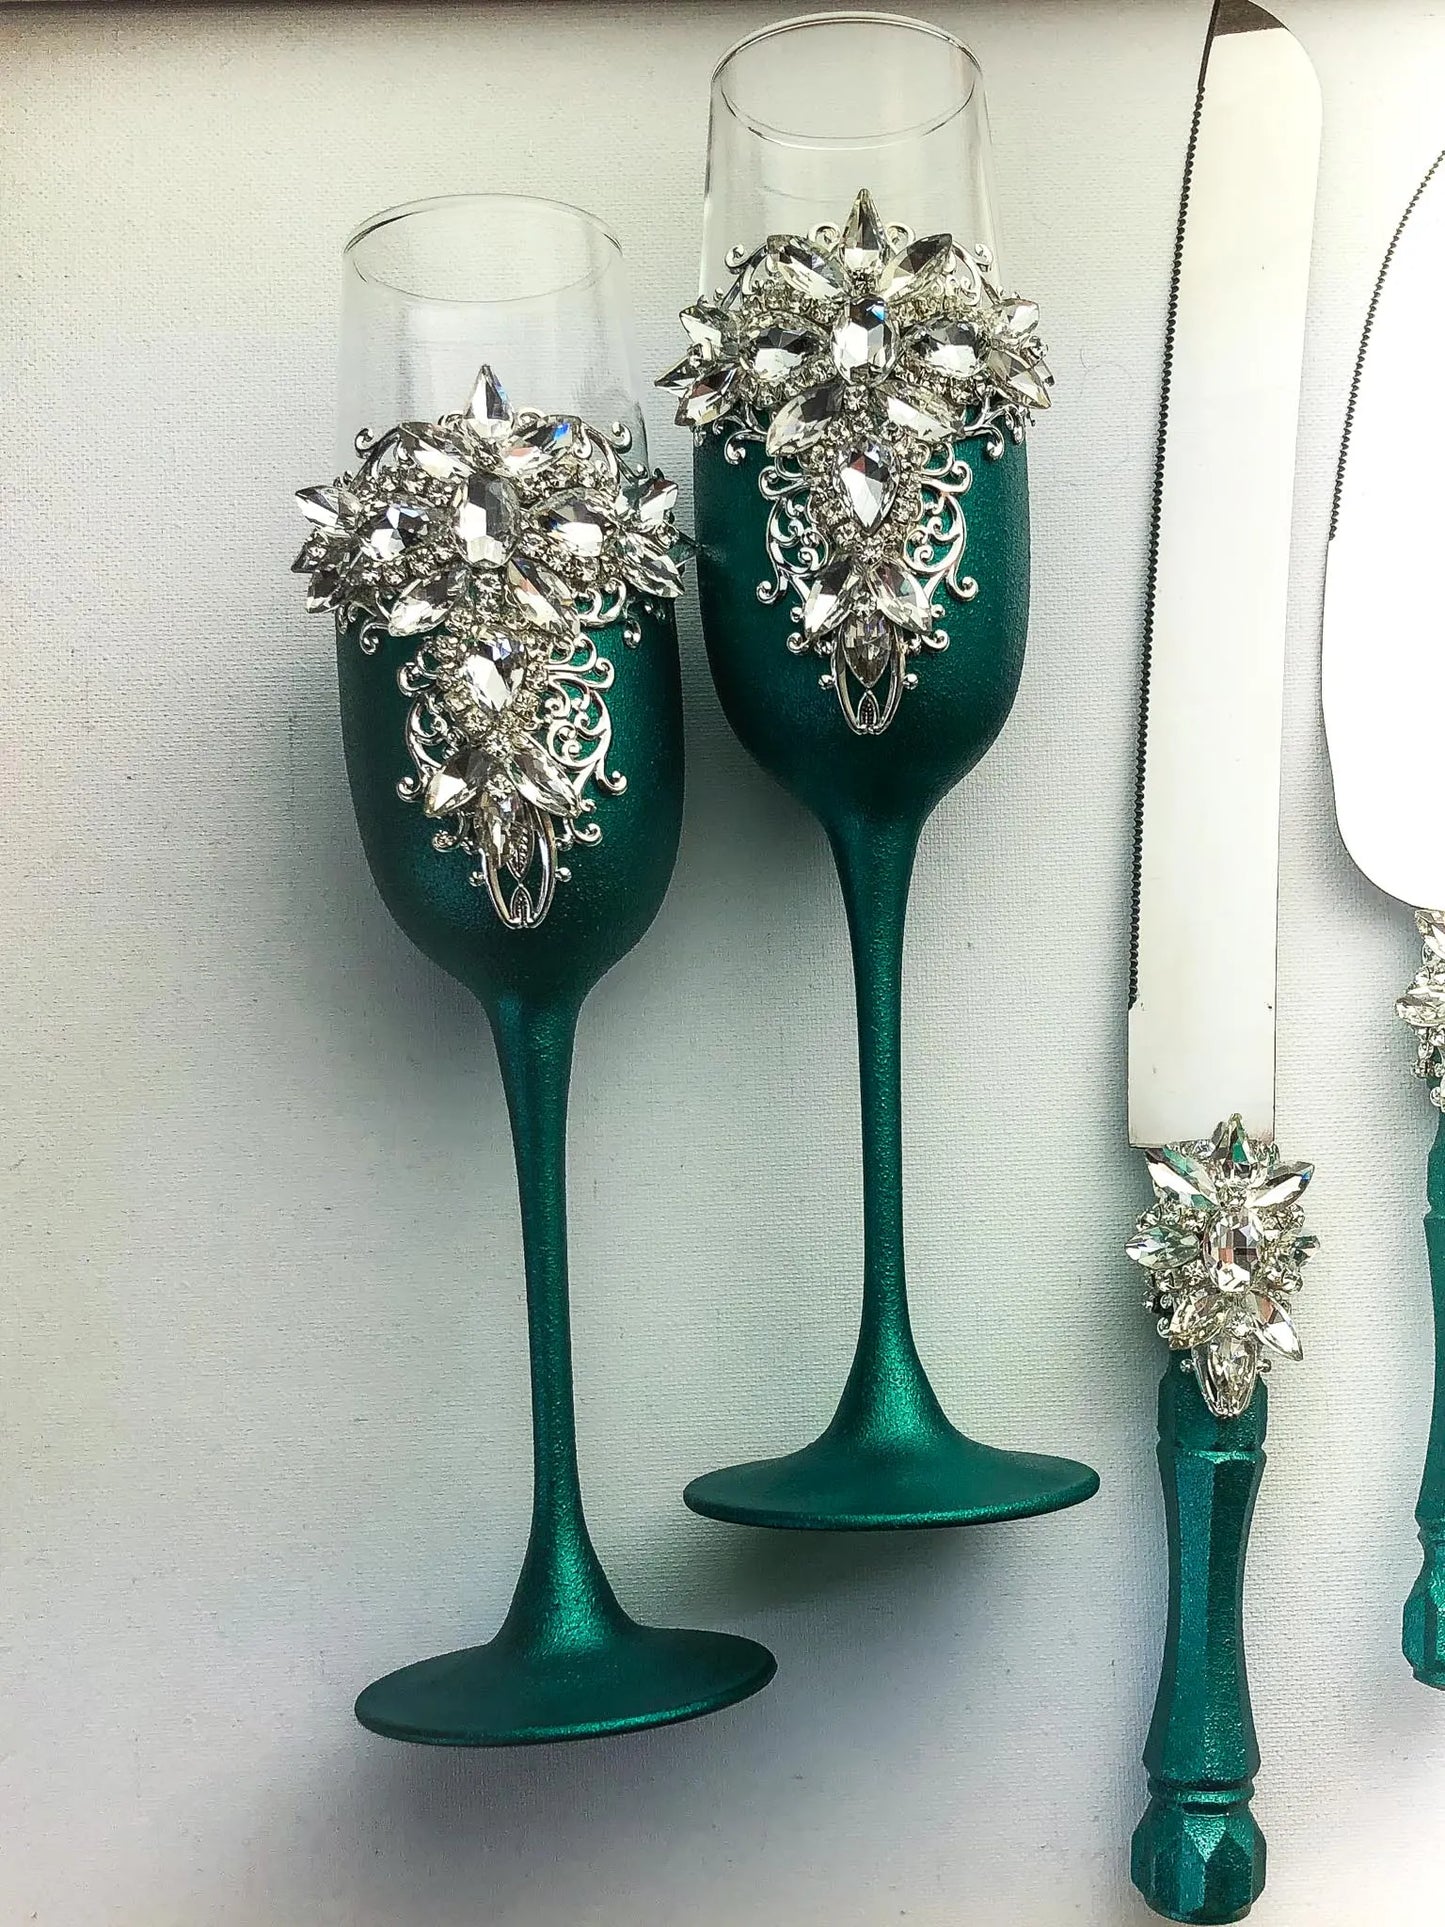 Exquisite Emerald and Silver Crystal Wedding Toasting Glasses for Mr. and Mrs.